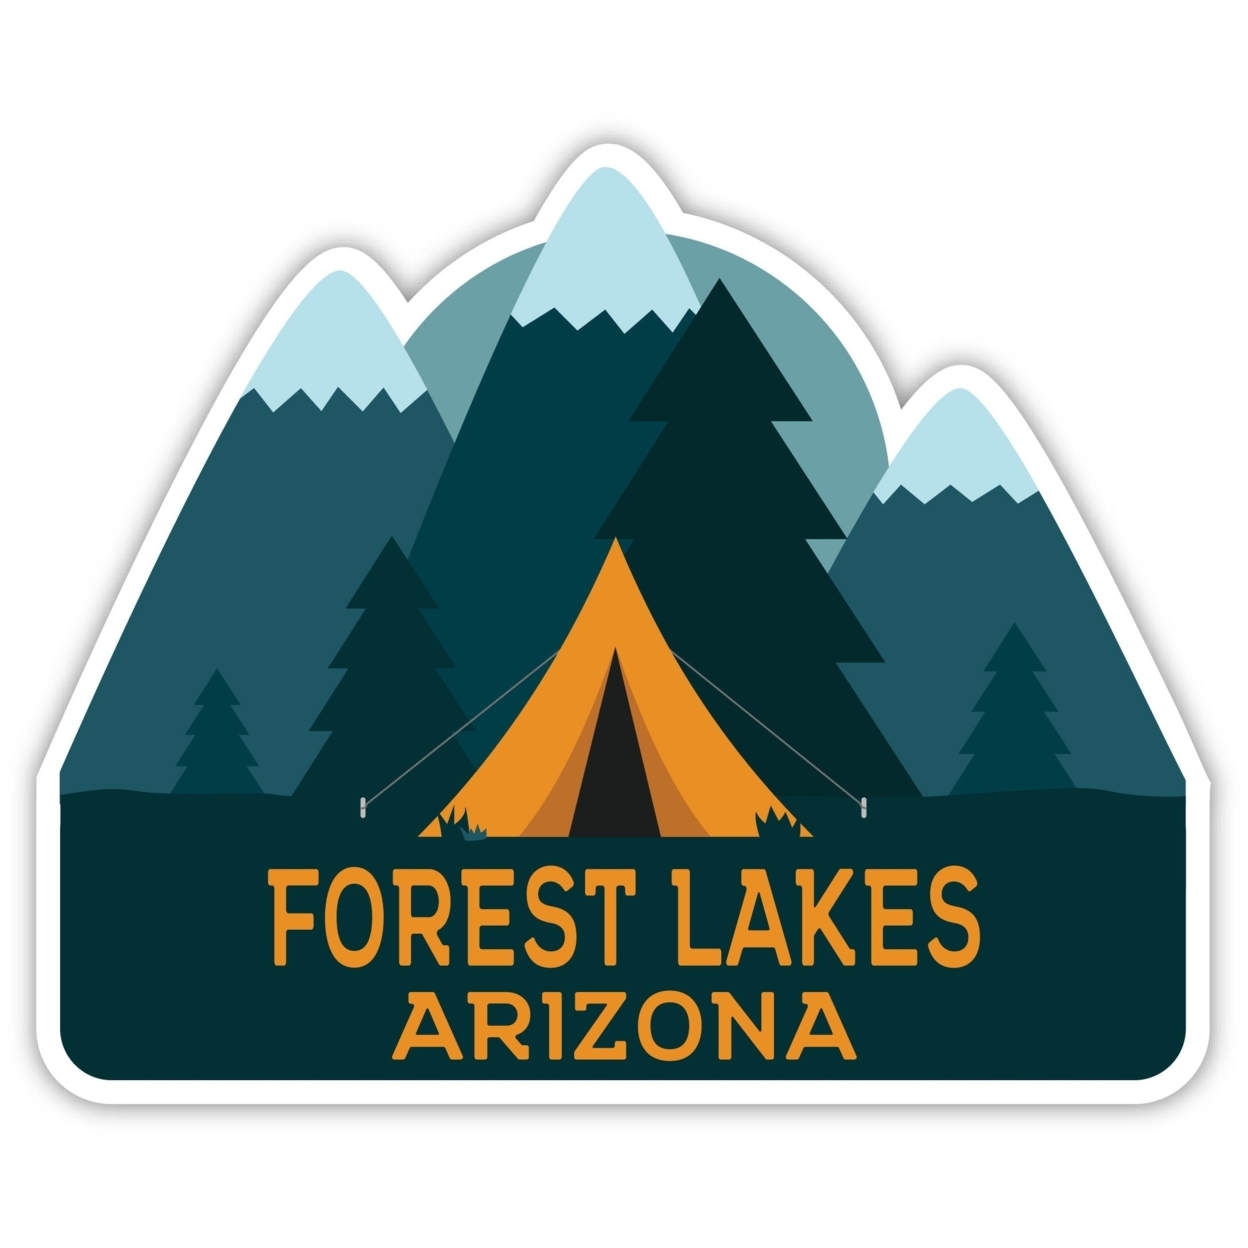 Forest Lakes Arizona Souvenir Decorative Stickers (Choose Theme And Size) - 4-Pack, 8-Inch, Tent